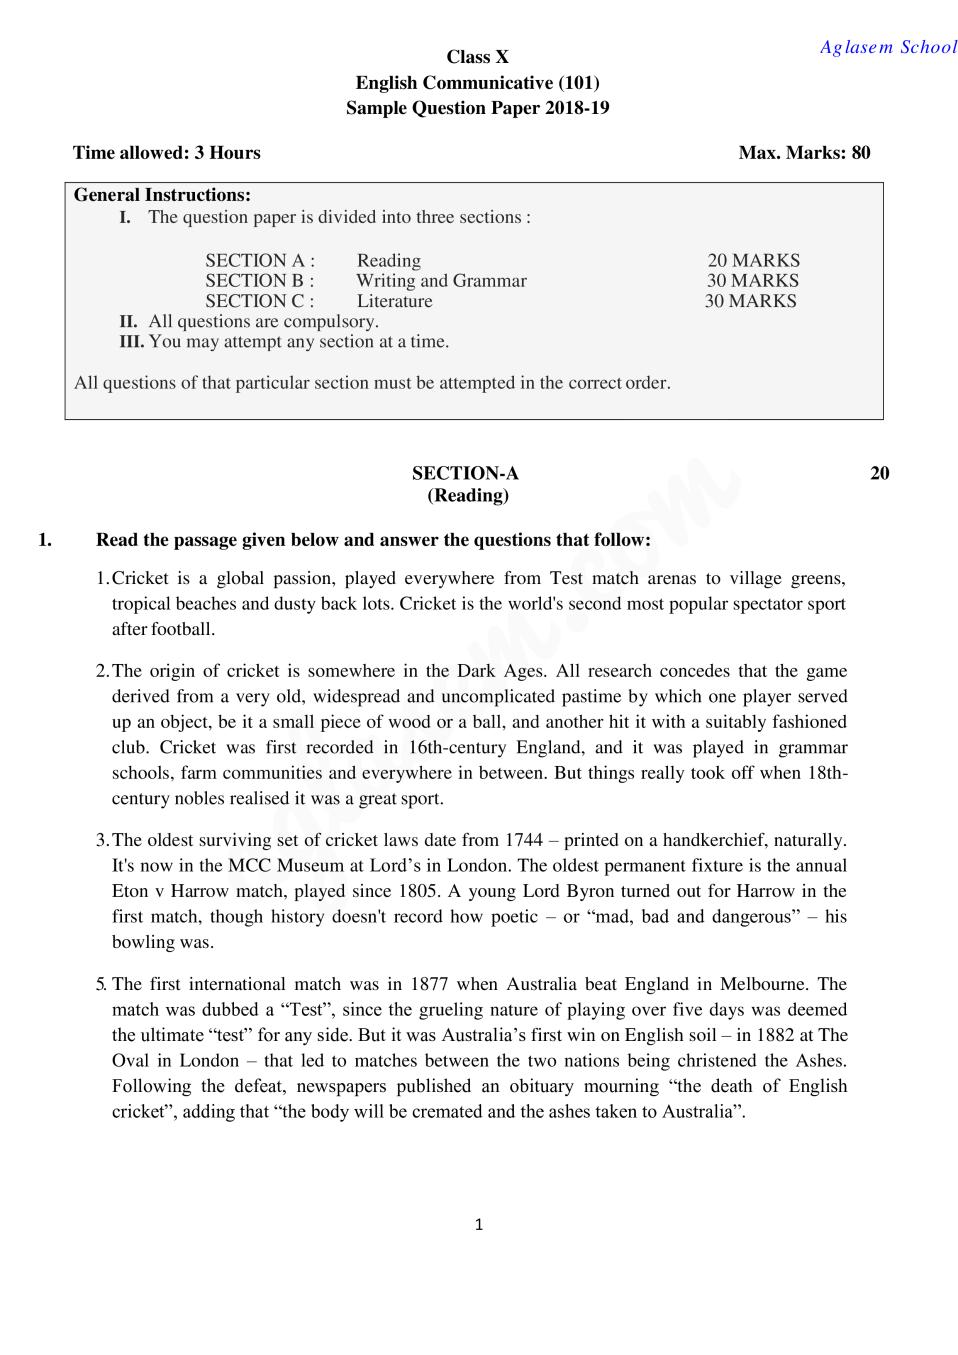 CBSE Class 10 Sample Paper 2019 for English Communicative - Page 1